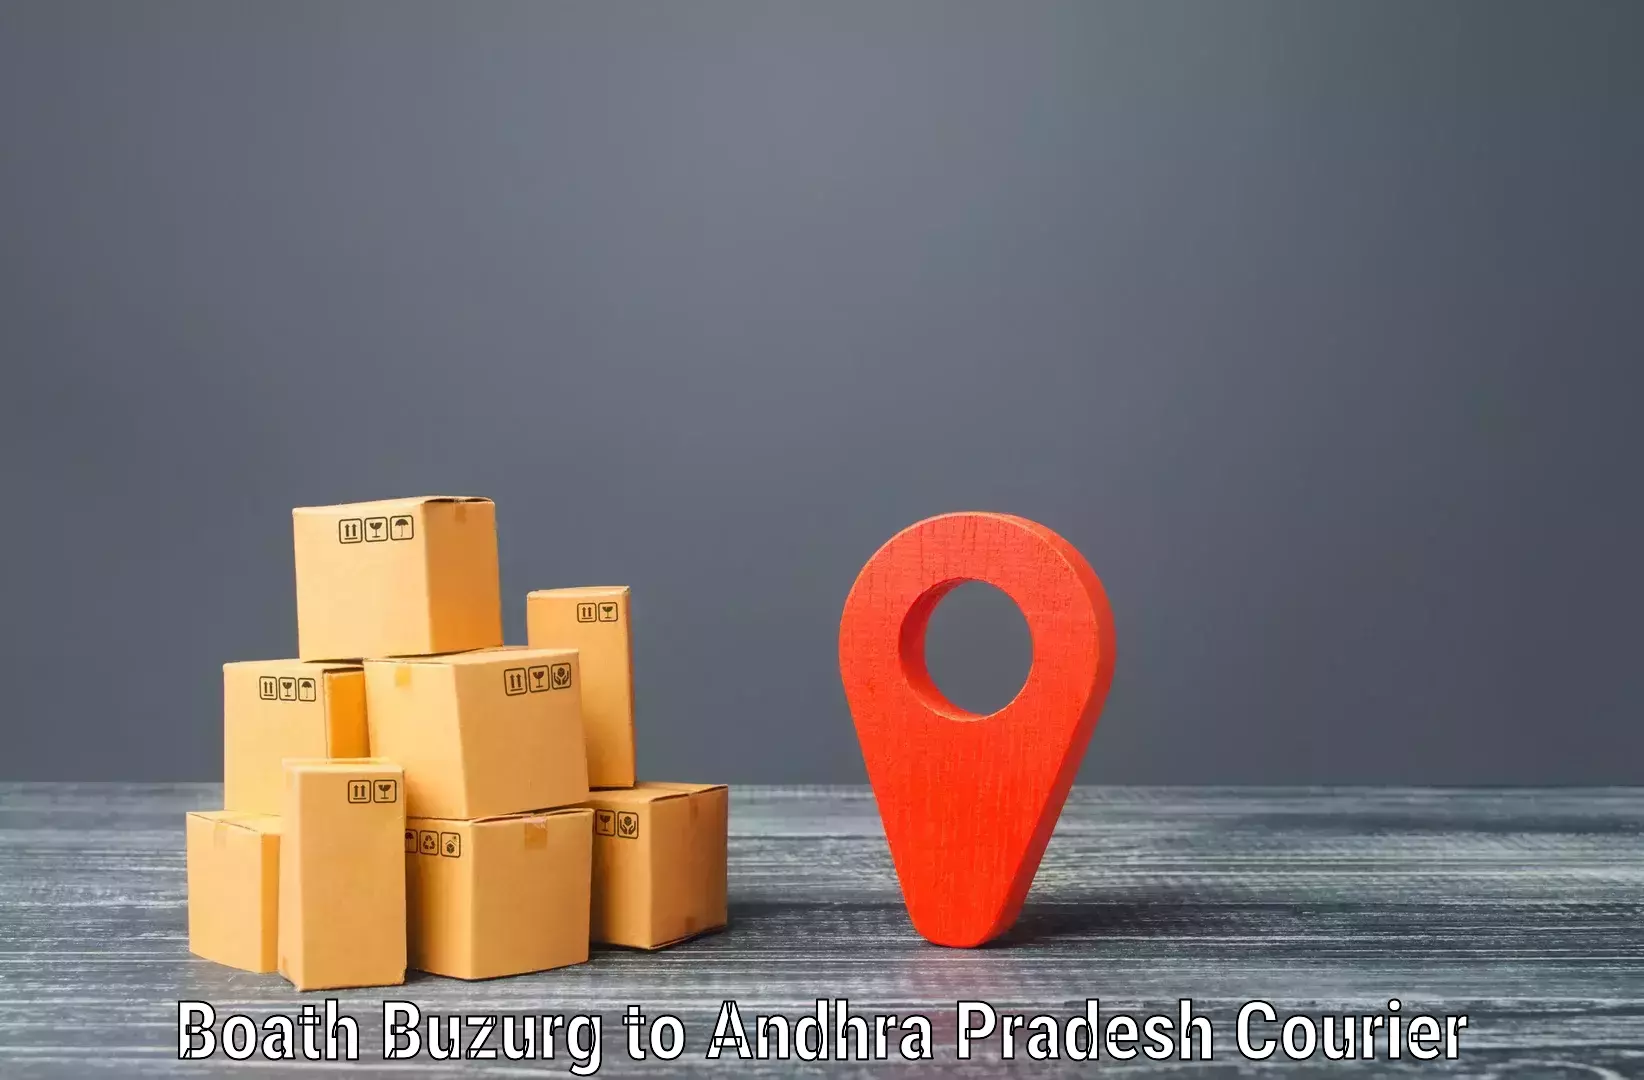 Cost-effective courier options Boath Buzurg to Andhra Pradesh